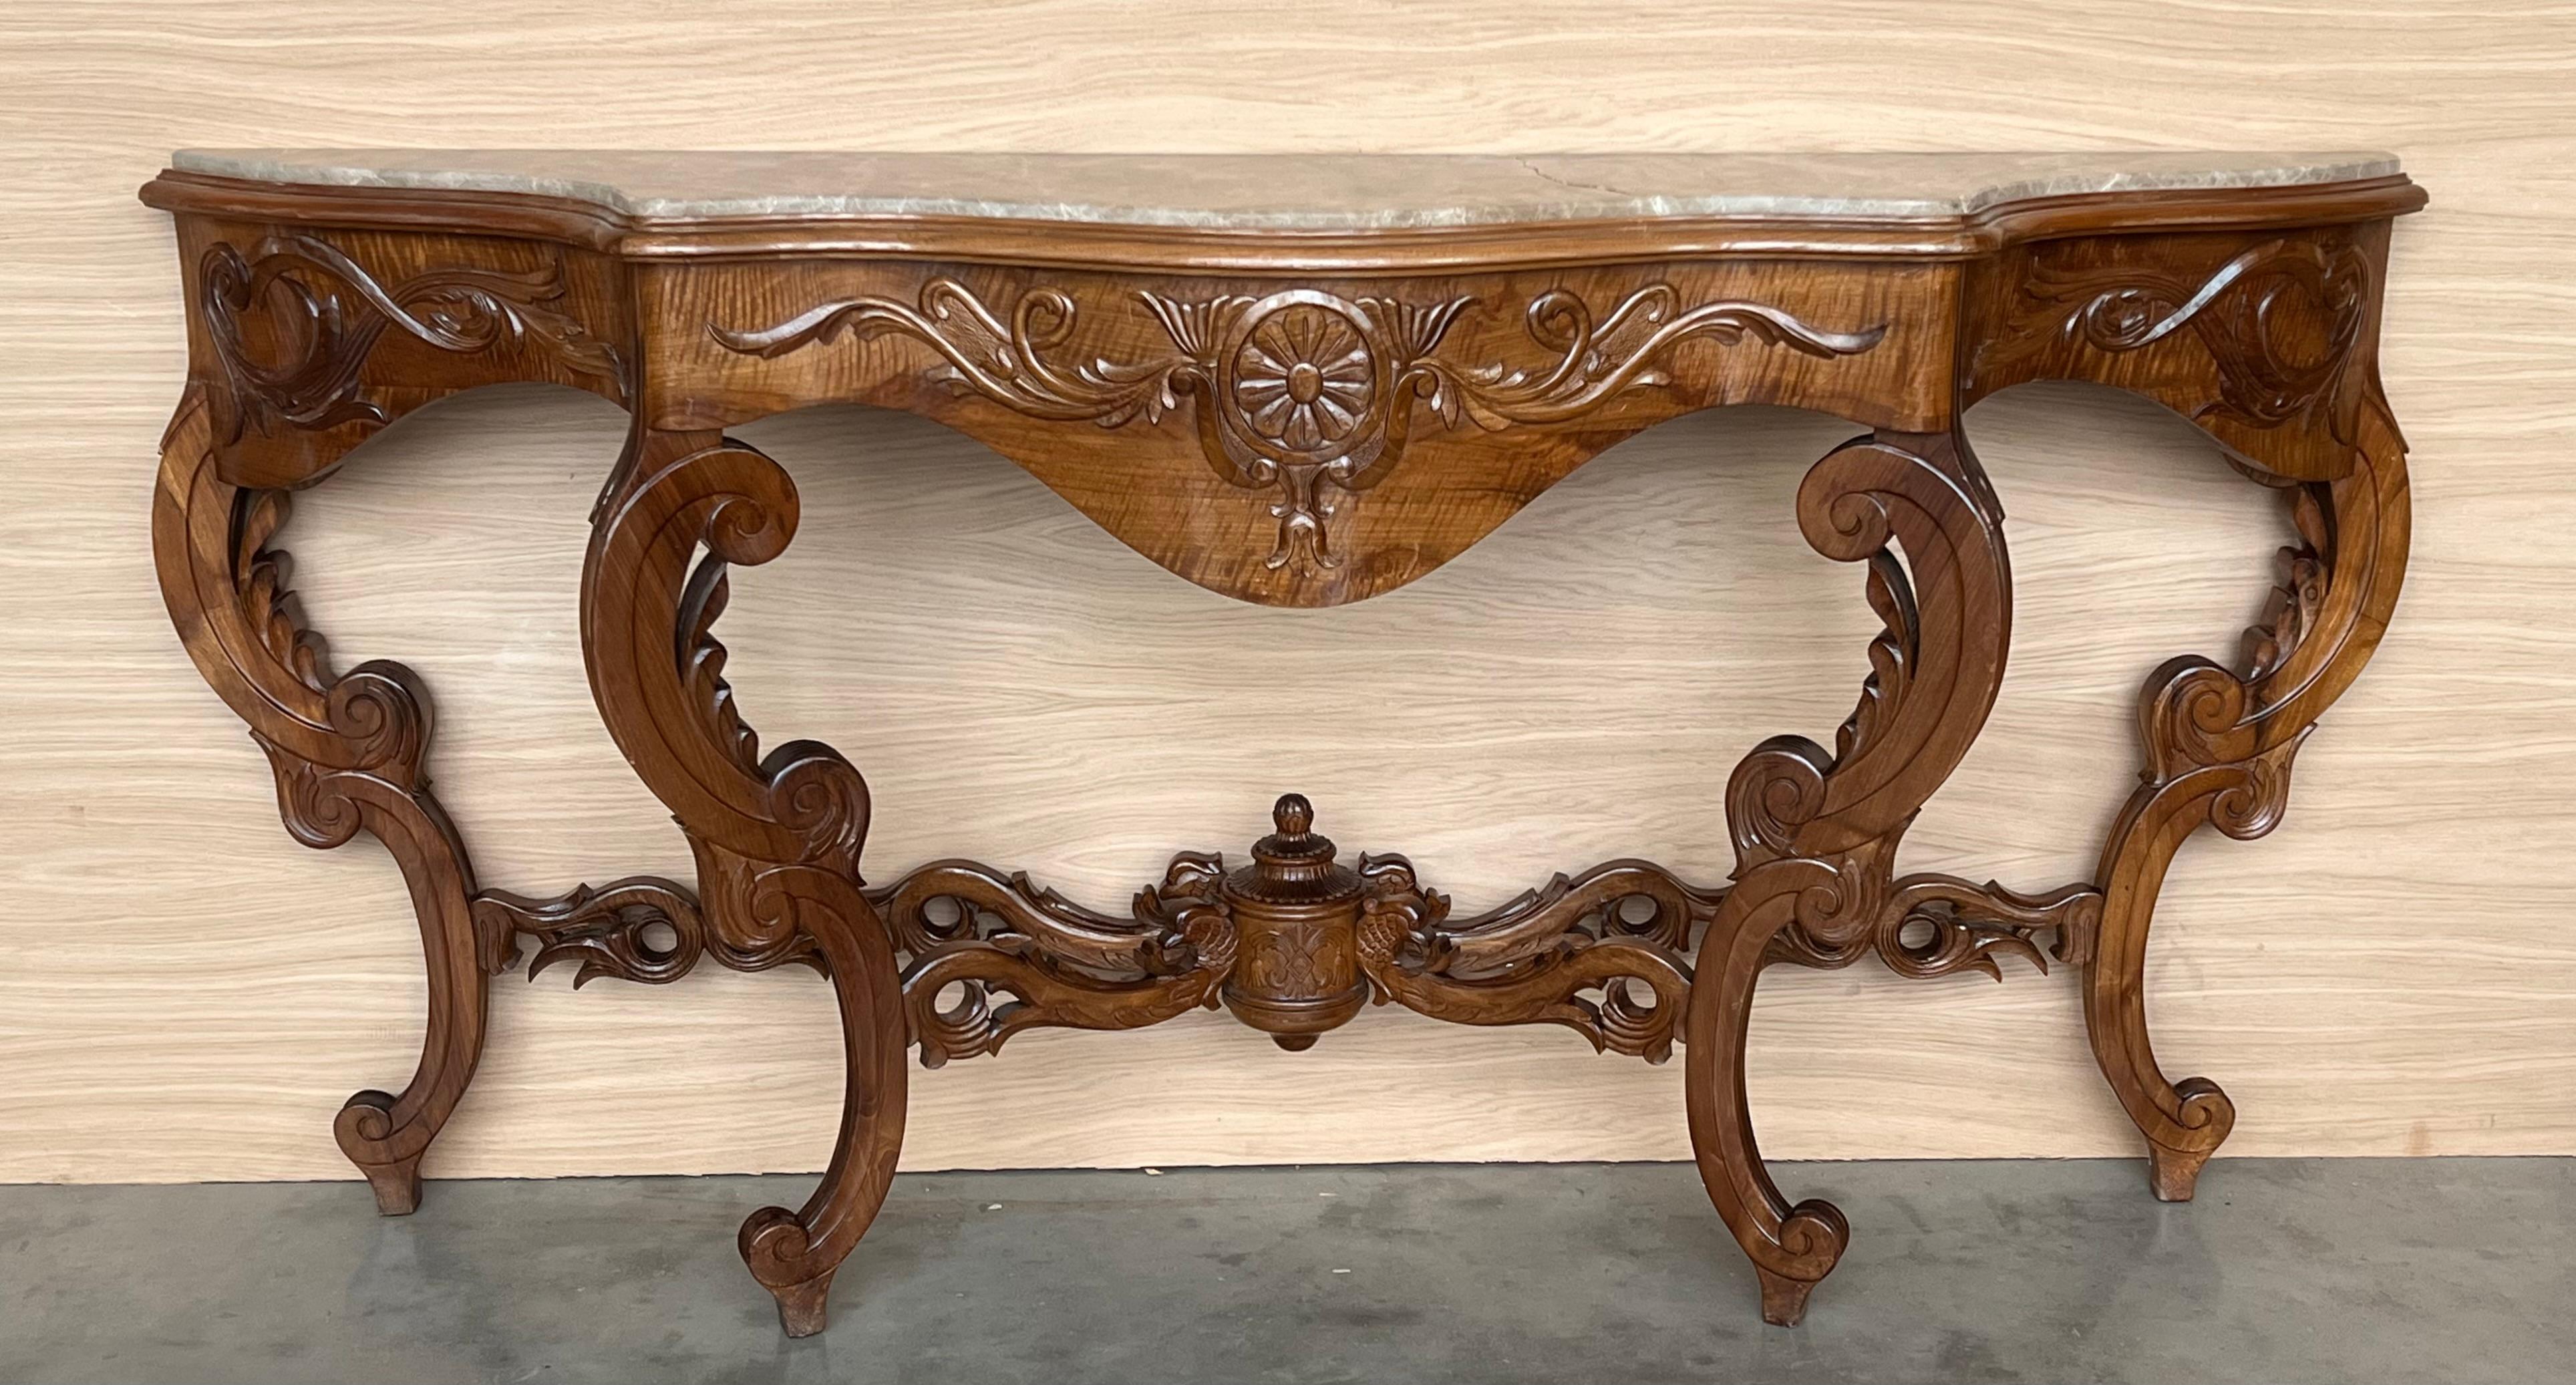 20th Century Large French Regency Carved Walnut Console Table with Gilted Edges For Sale